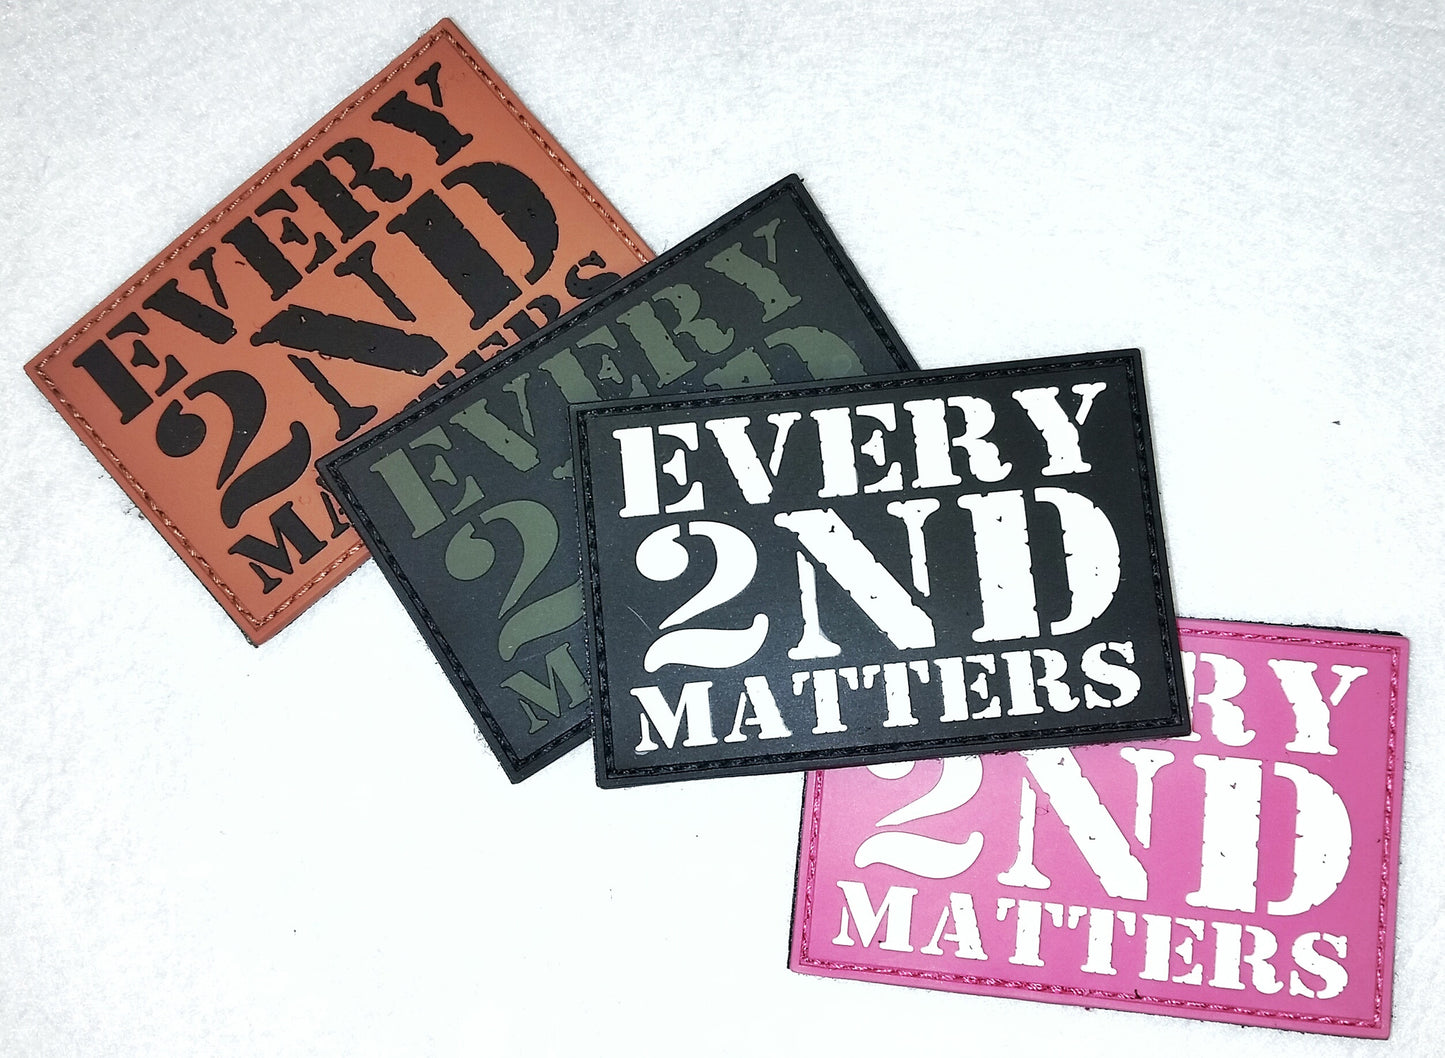 Sold Out - 4 Pack of Every 2nd Matters (6th Gen) - PVC Patches